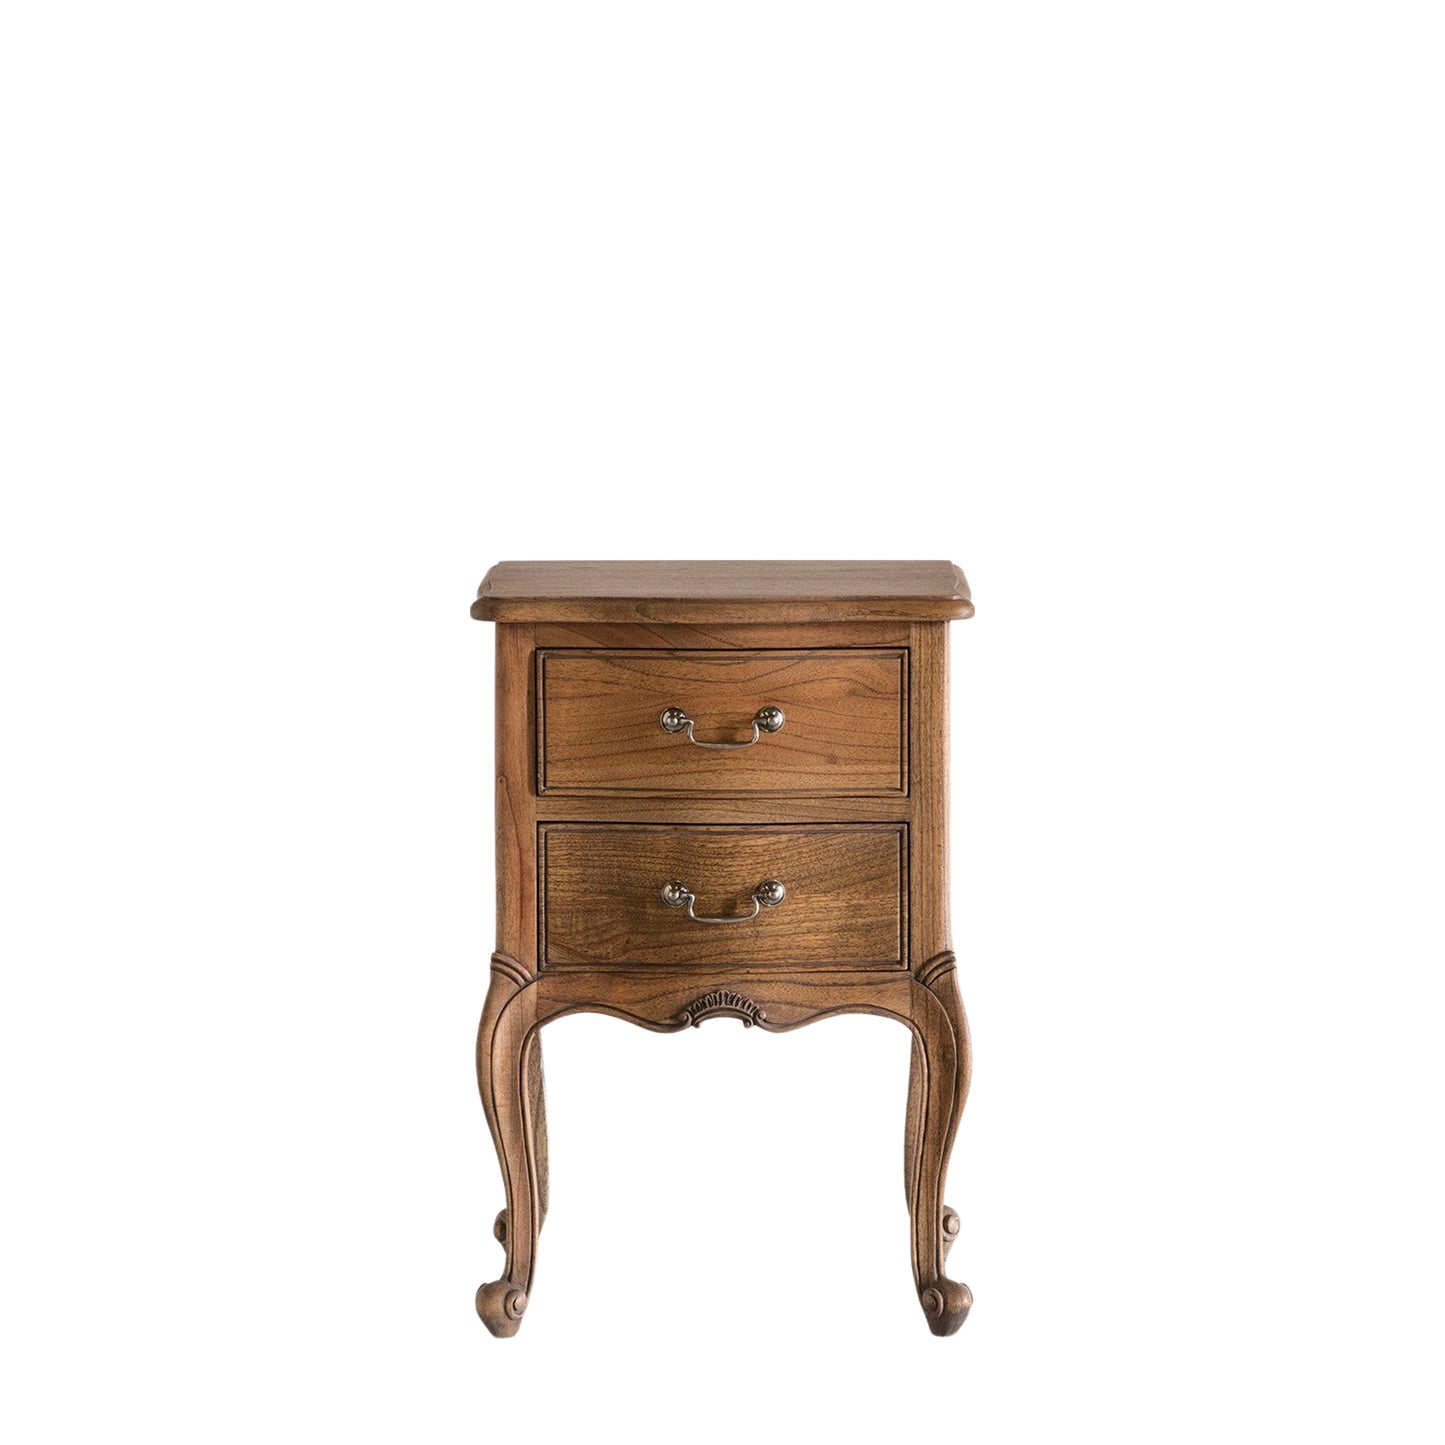 A small Holne Bedside Table Weathered 520x430x750mm with two drawers for home furniture and interior decor from Kikiathome.co.uk.